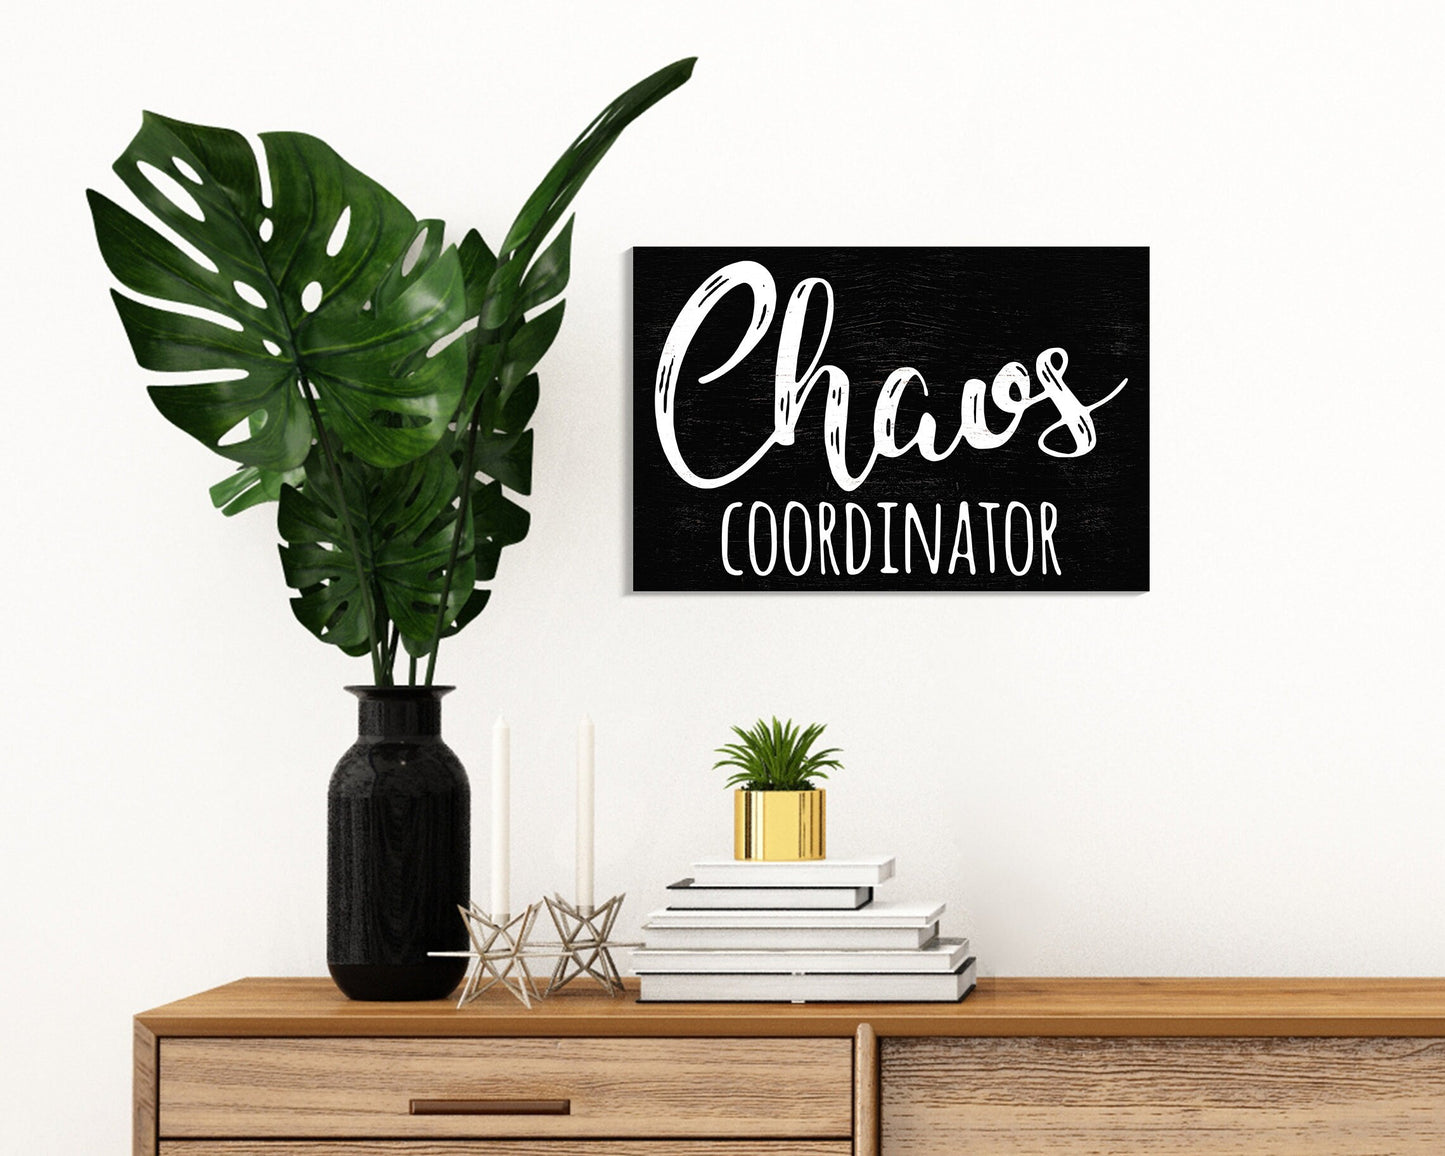 Embrace the Chaos: 7.5in x 5in Wooden Wall Decor Sign - "Chaos Coordinator" - Clever & Fun